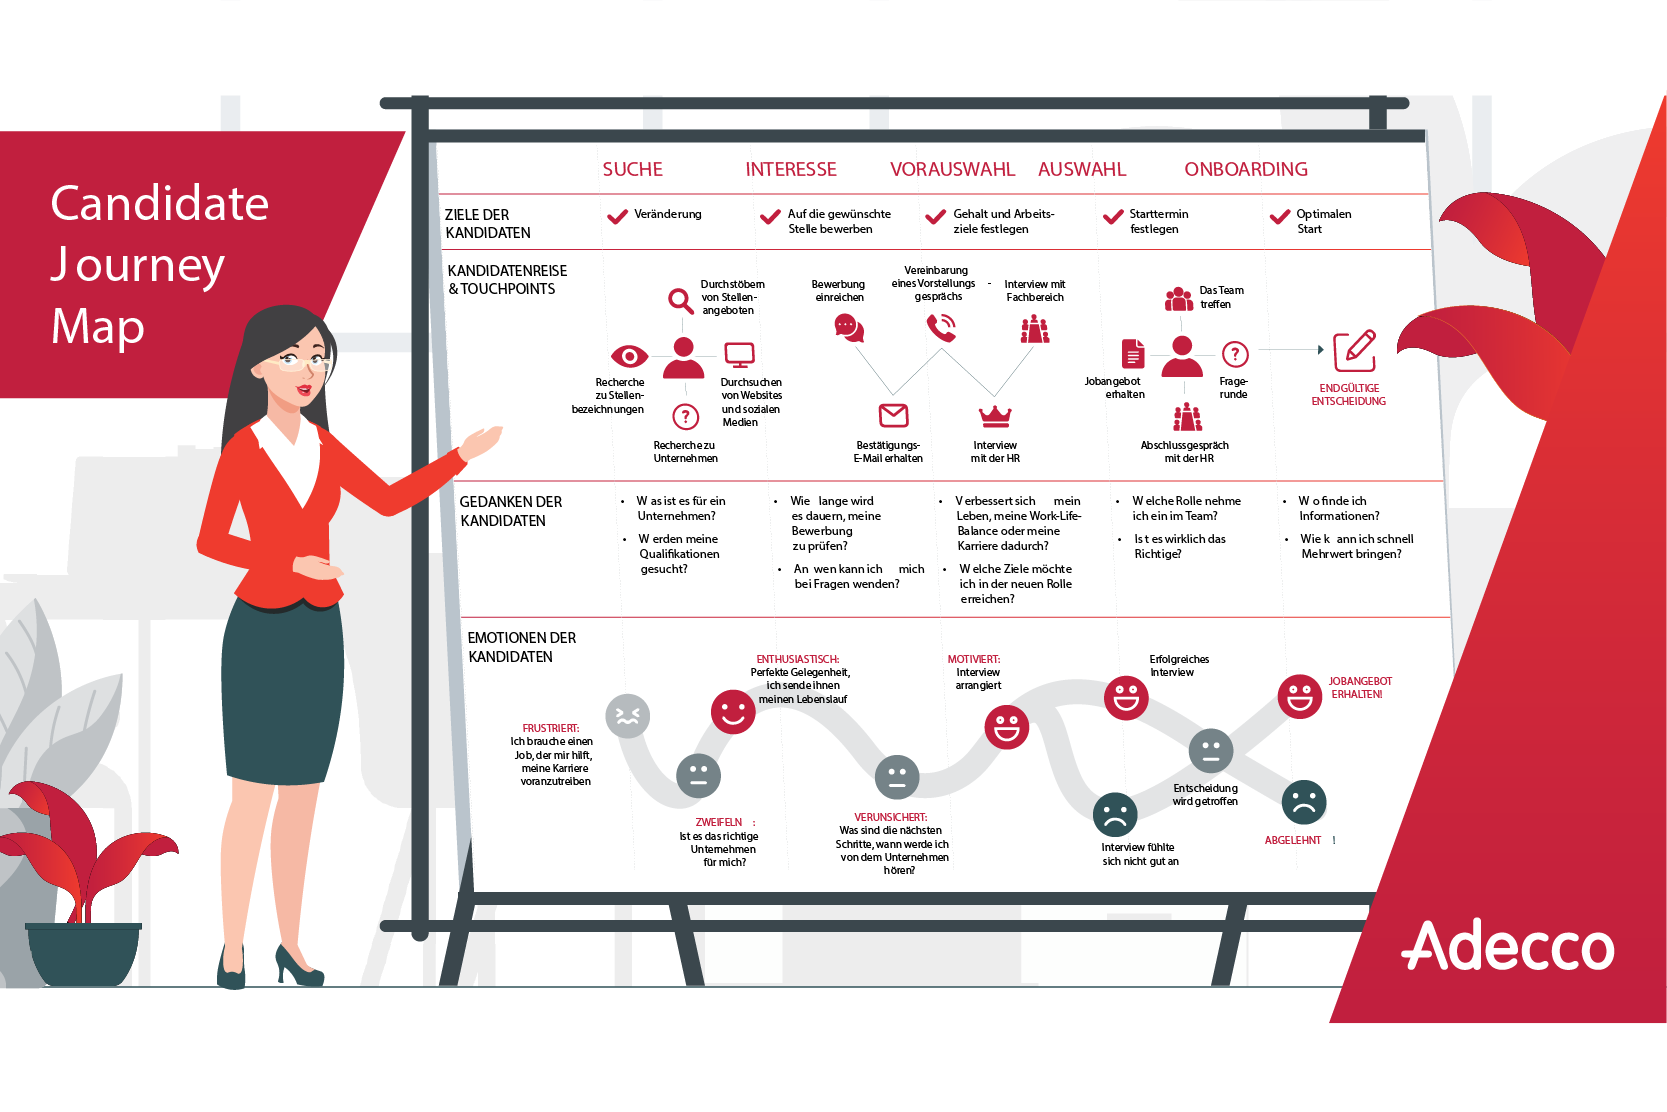 adecco candidate journey map